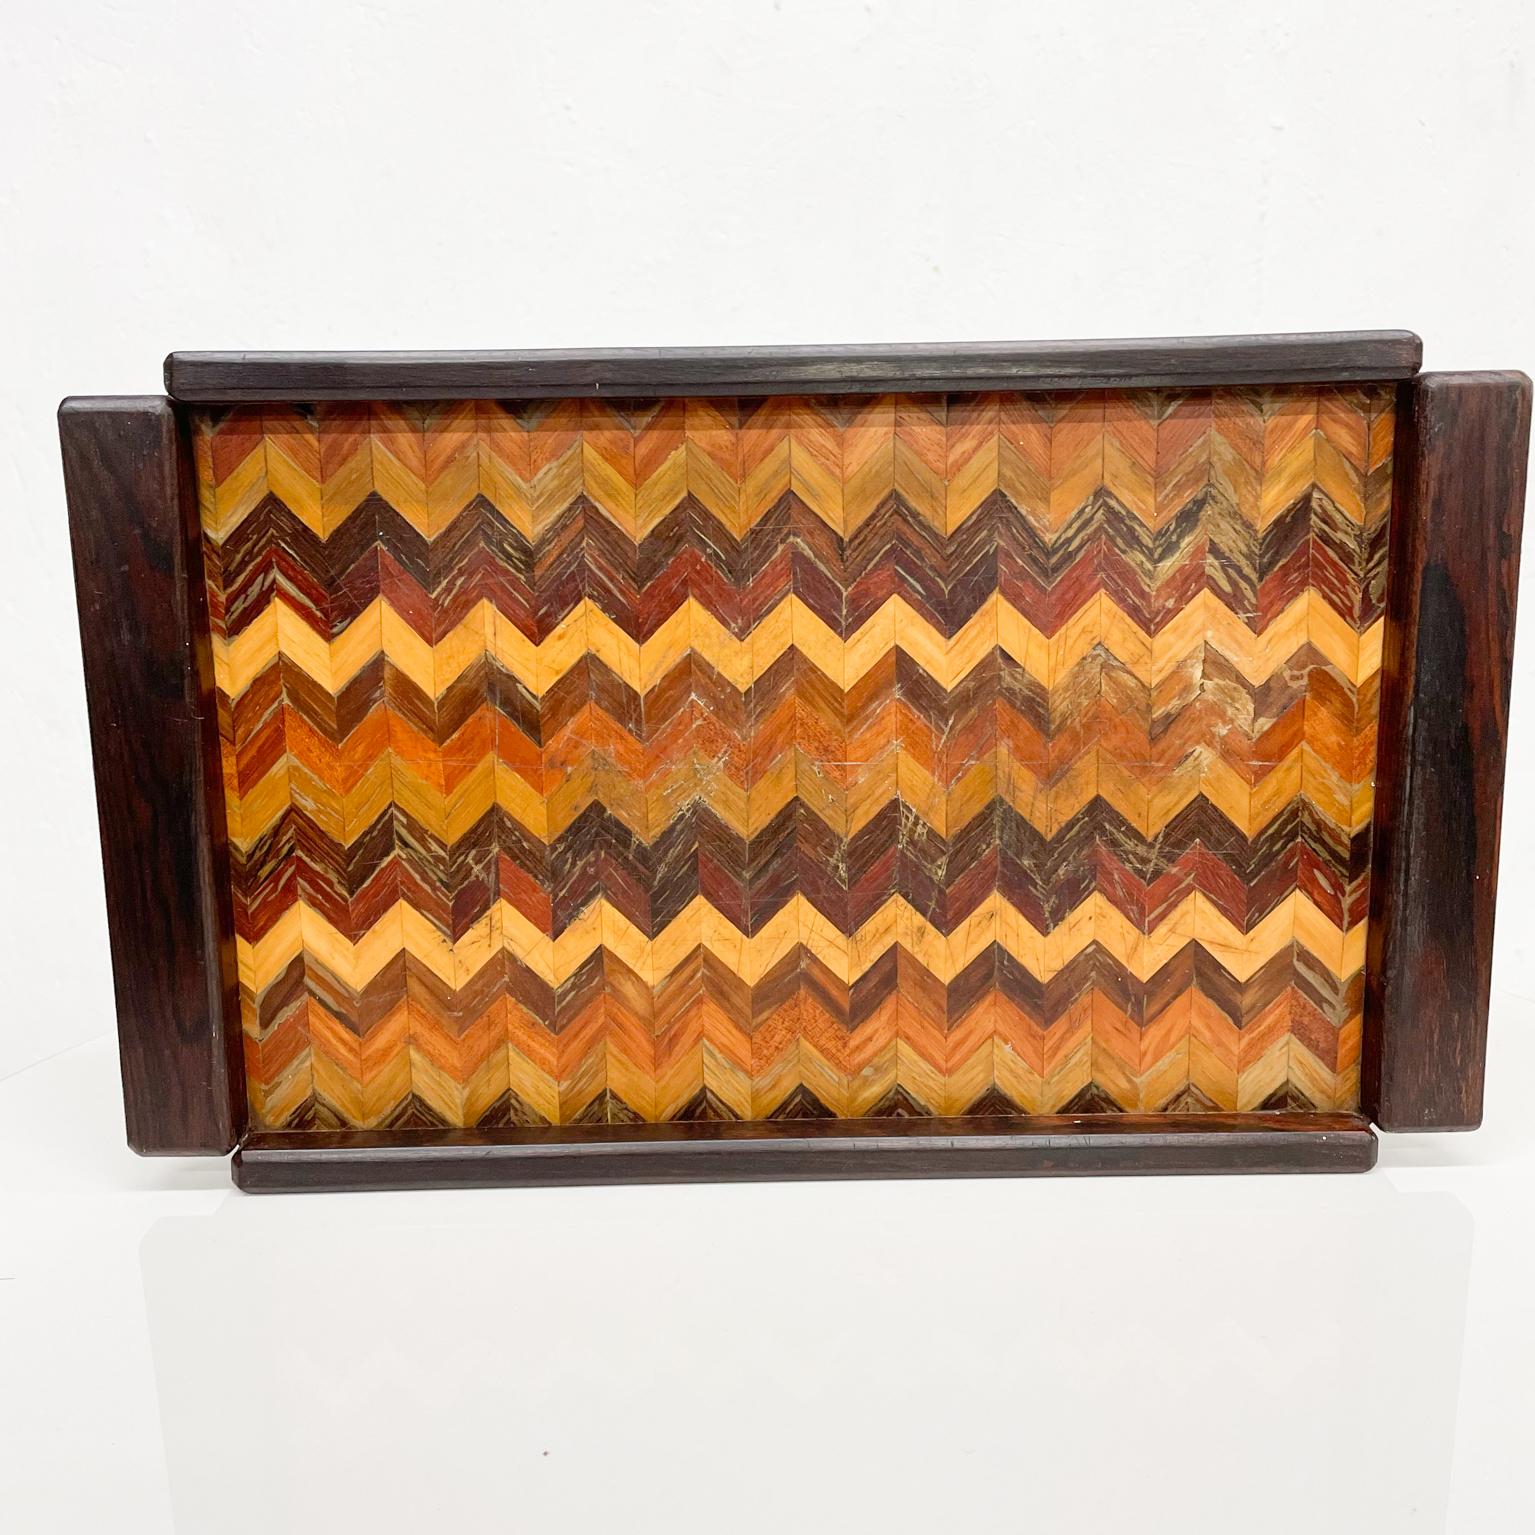 Service Tray
Don Shoemaker for senal service tray in cocobolo exotic tropical wood medley Morelia Mexico 1950s
Medium size tray. Geometric Design.
Maker label present.
Measures: 15 L x 9 W x 1.18 (3/16) inches
Original preowned vintage